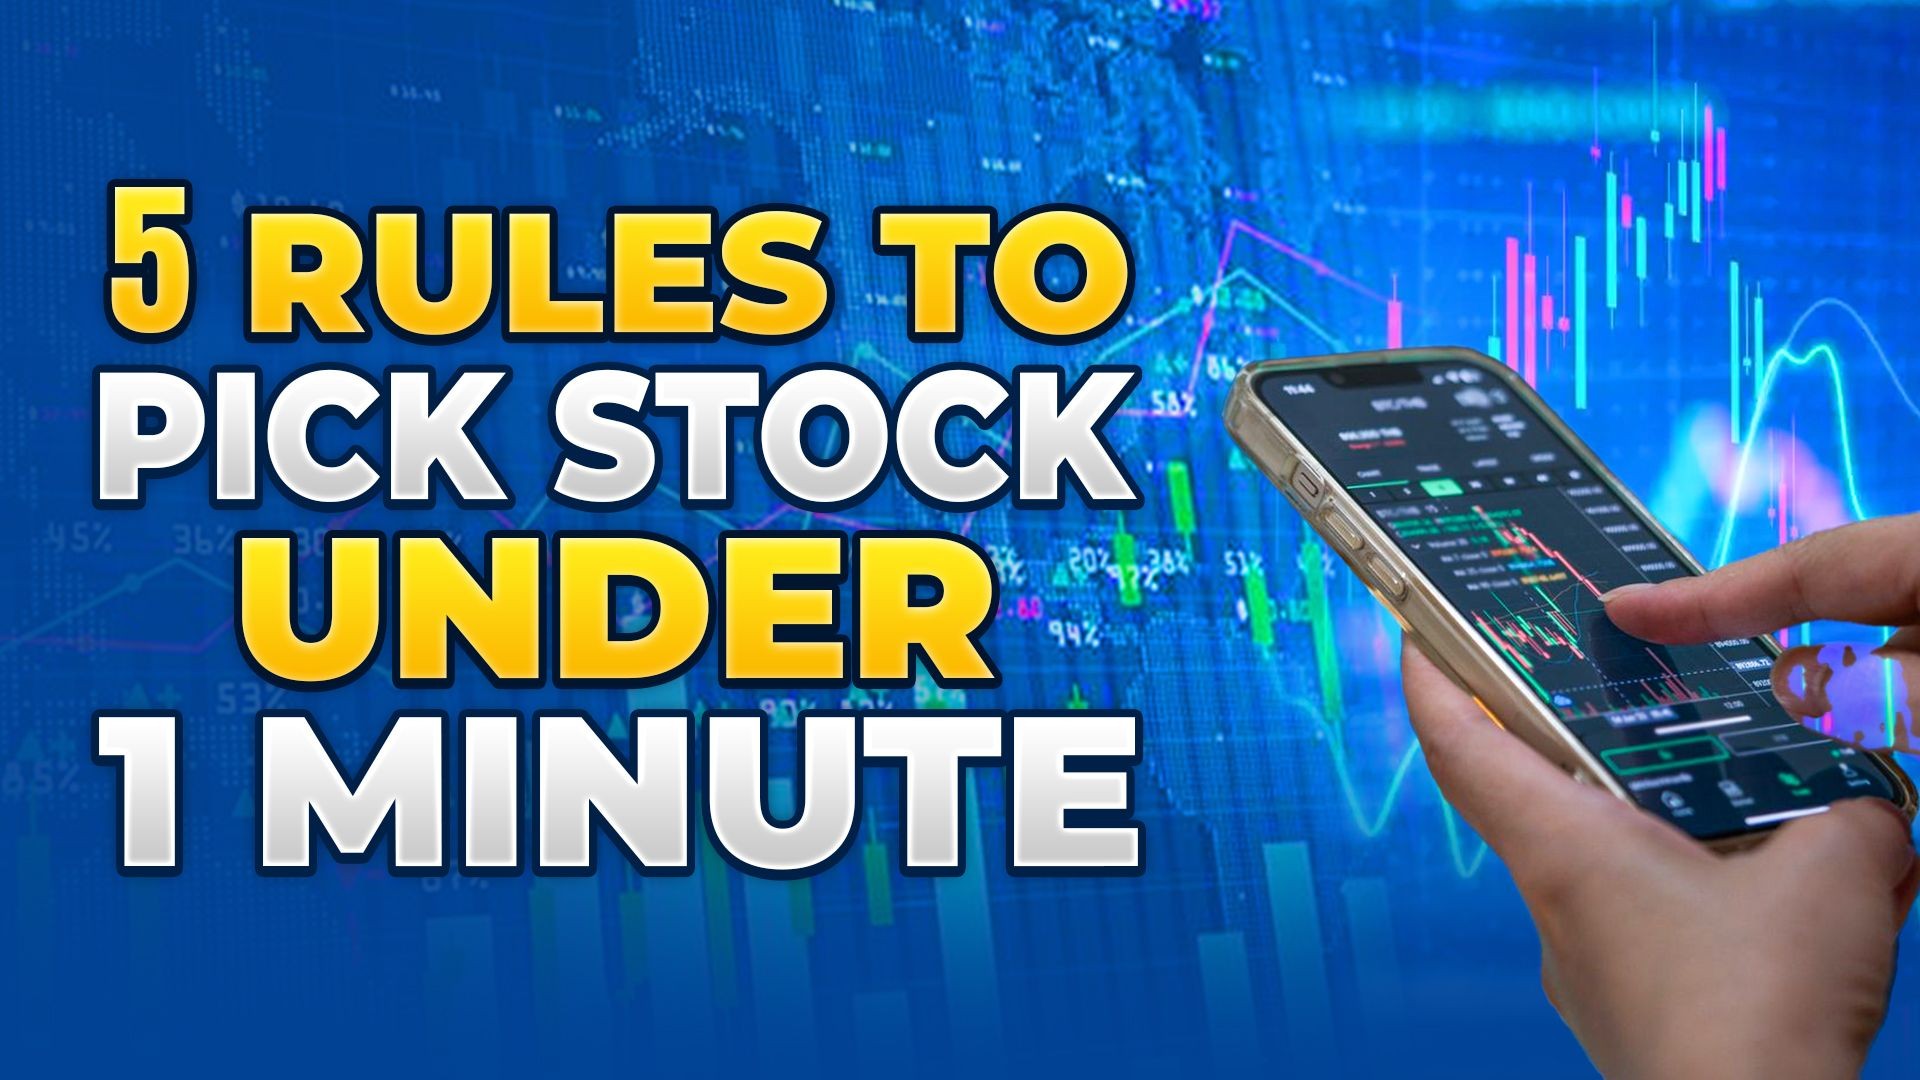 How To Pick Stock Under 1 Minute